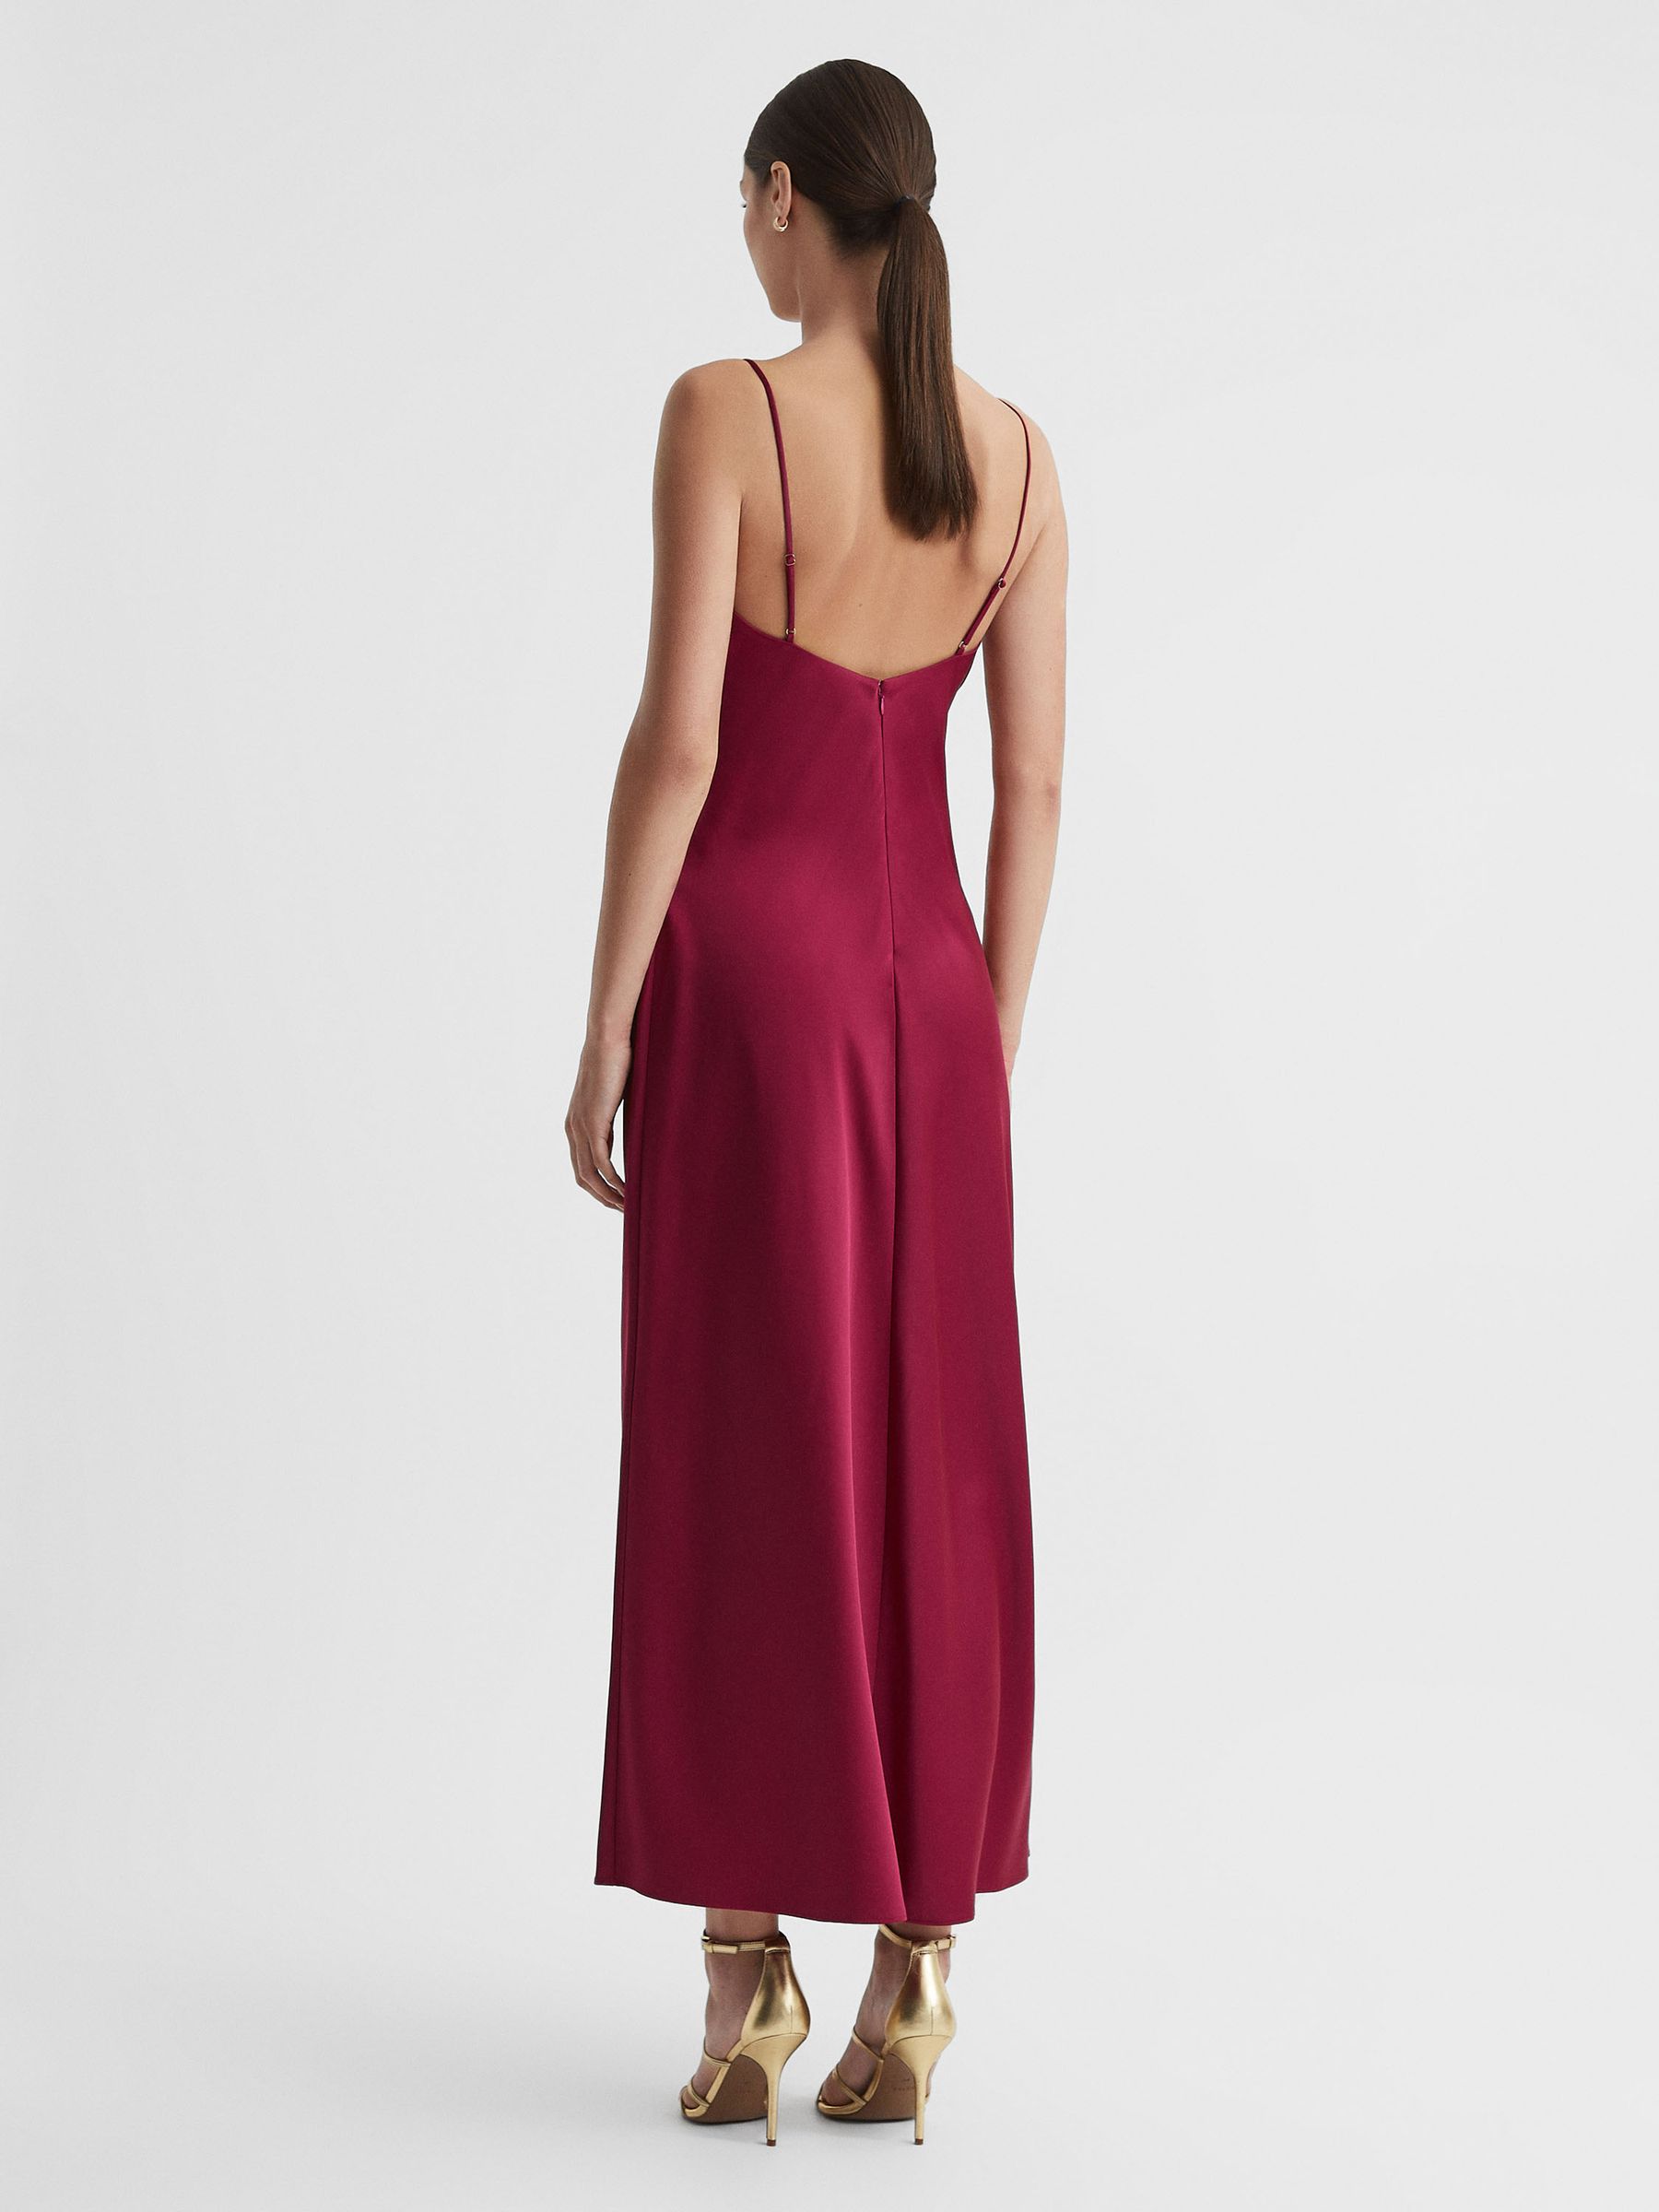 Significant Other Cowl Neck Satin Maxi Dress - REISS